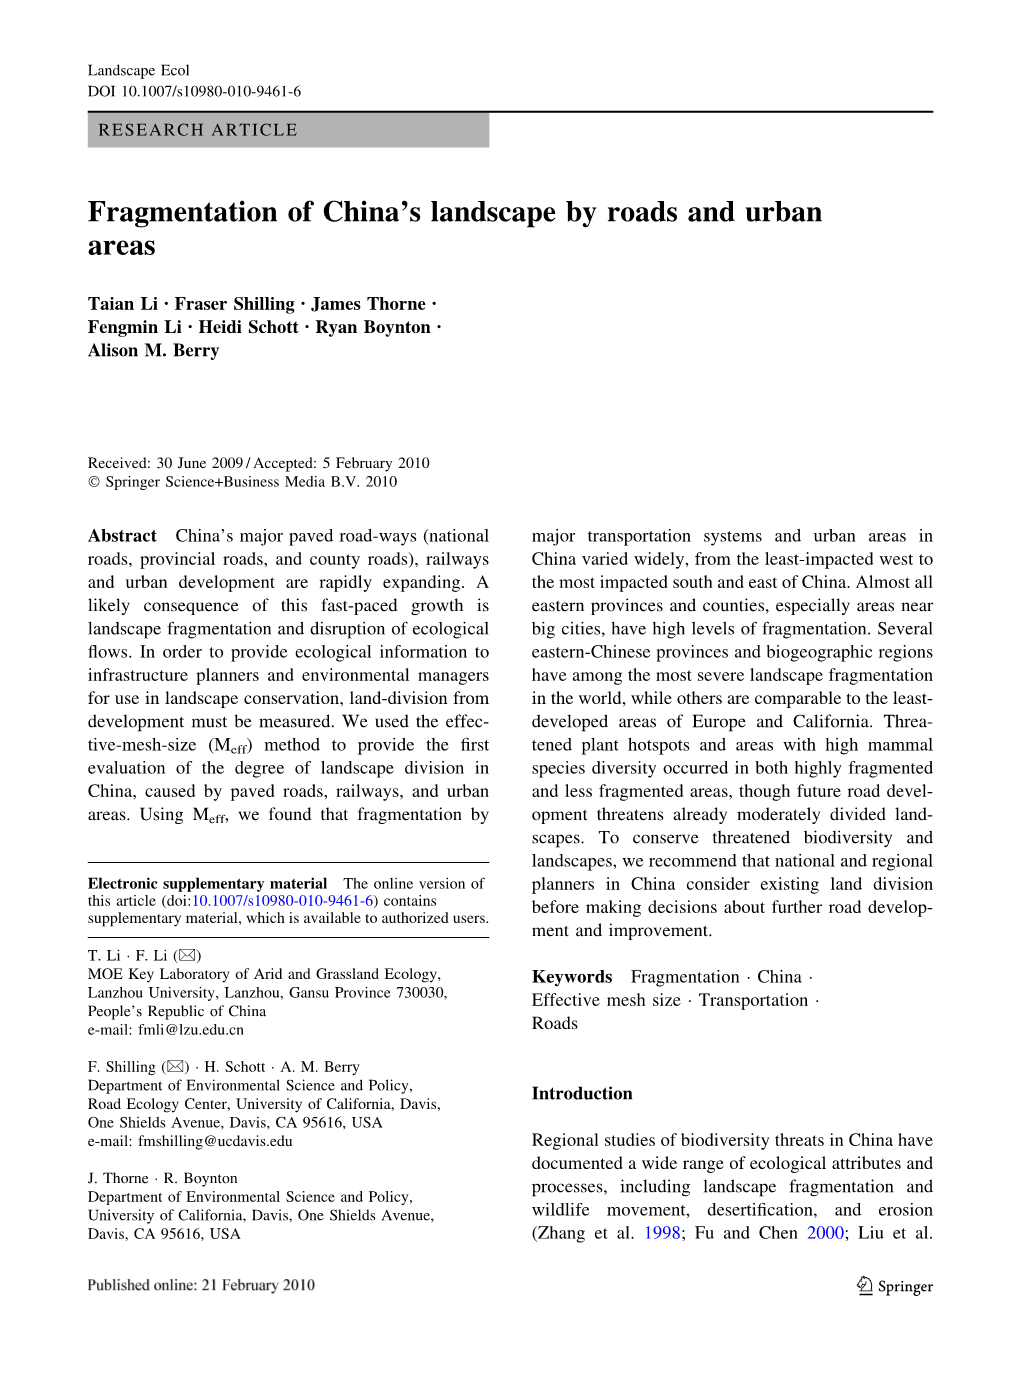 Fragmentation of China's Landscape by Roads and Urban Areas